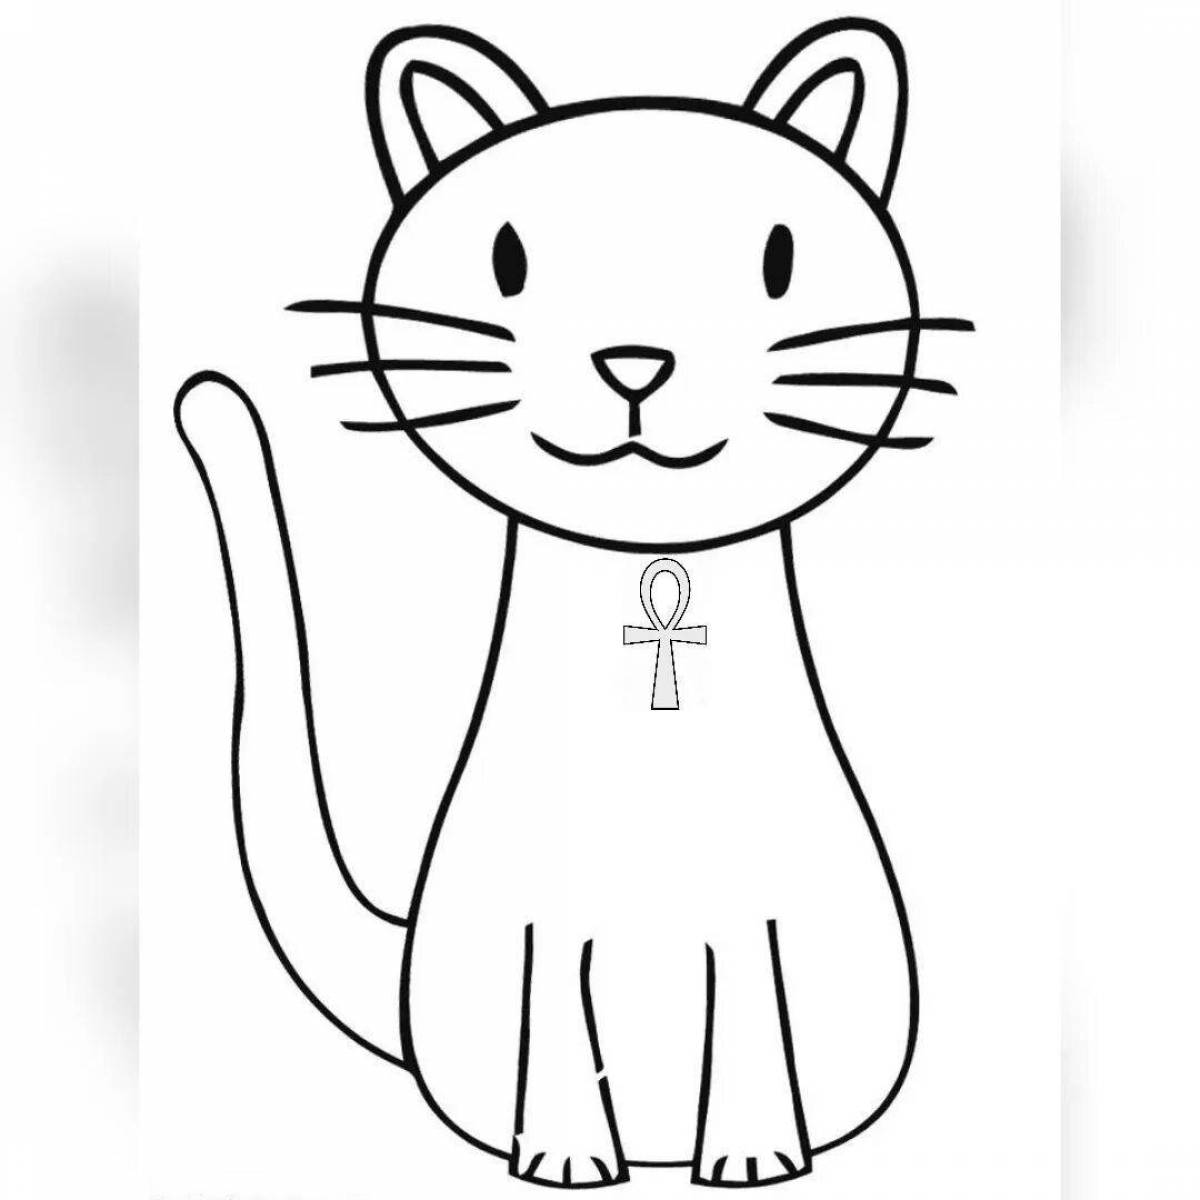 Attractive kitty coloring book for 2-3 year olds